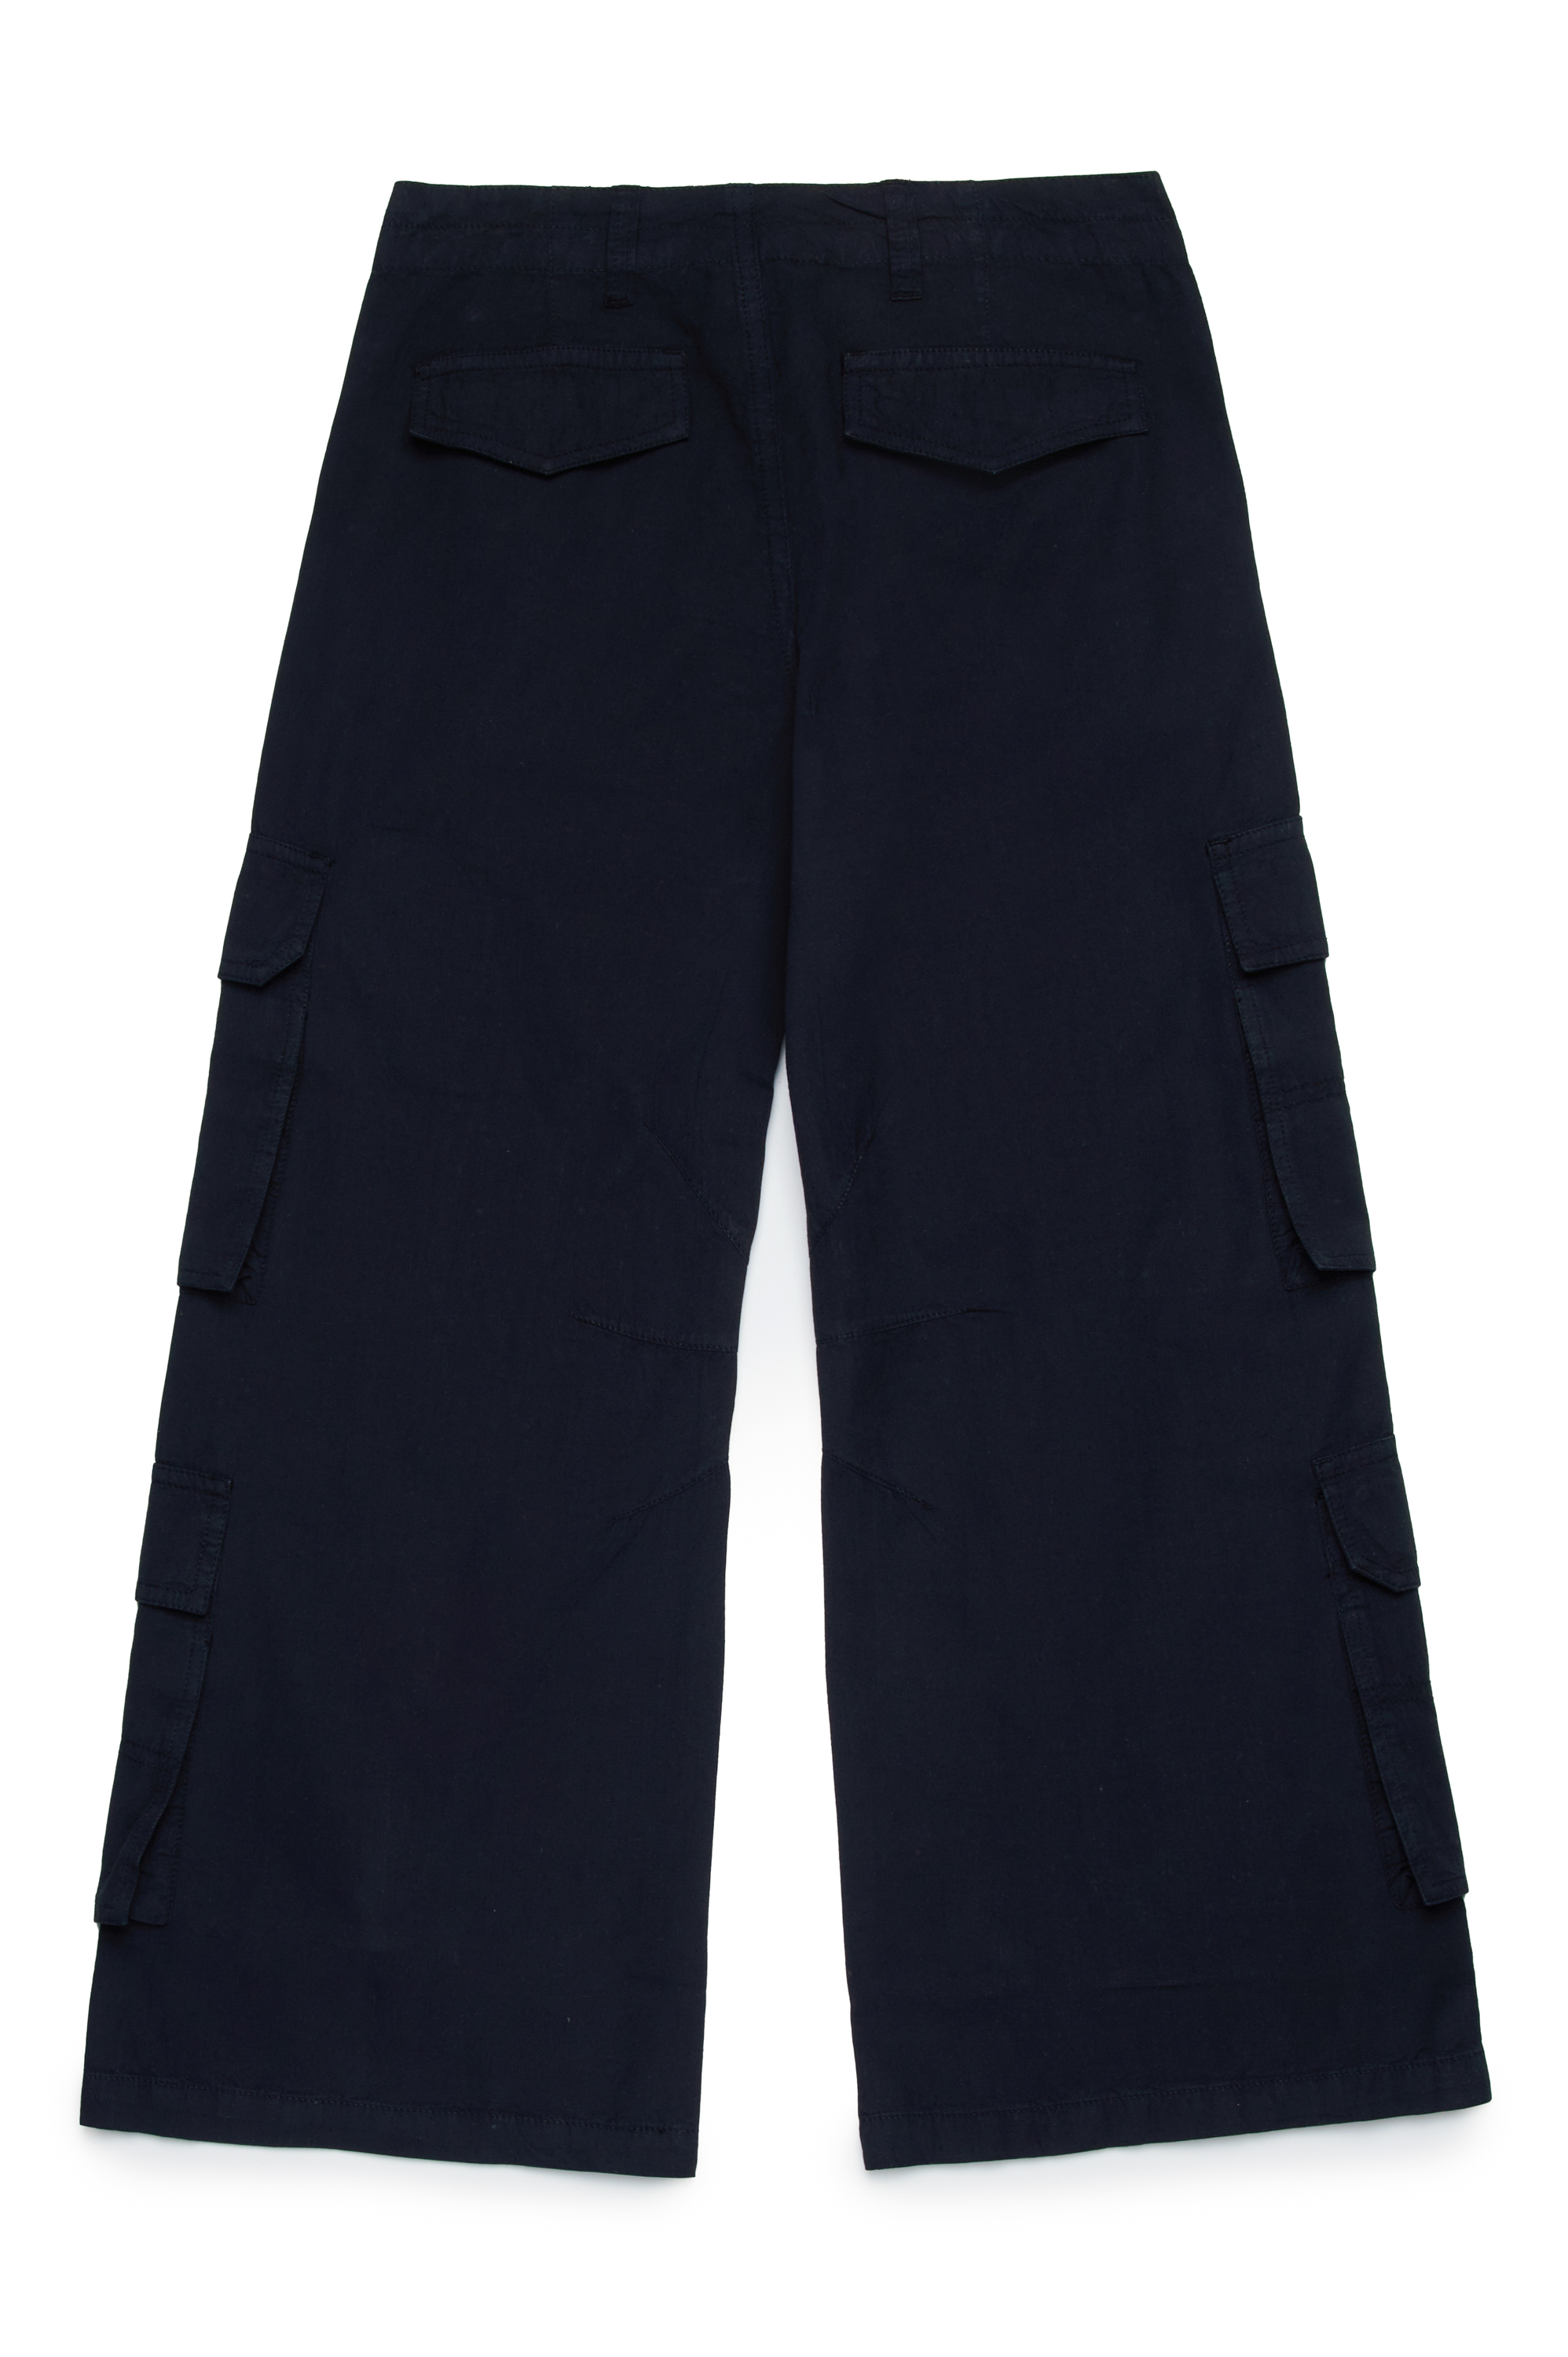 Women's navy blue cargo pants with pockets - Clothing baby blue